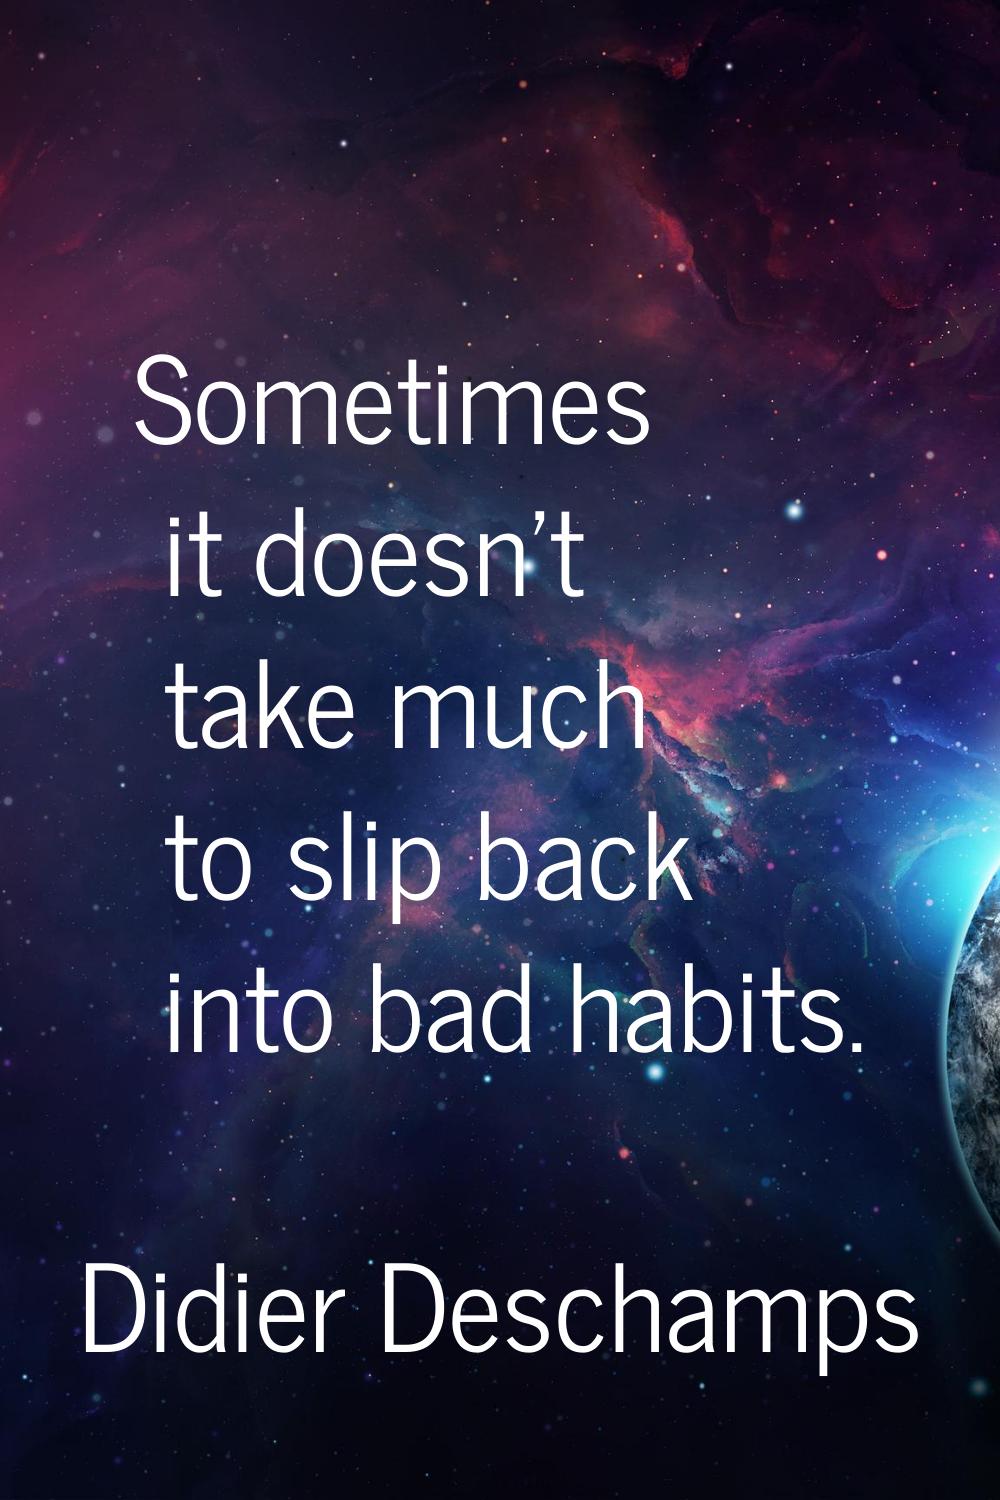 Sometimes it doesn't take much to slip back into bad habits.